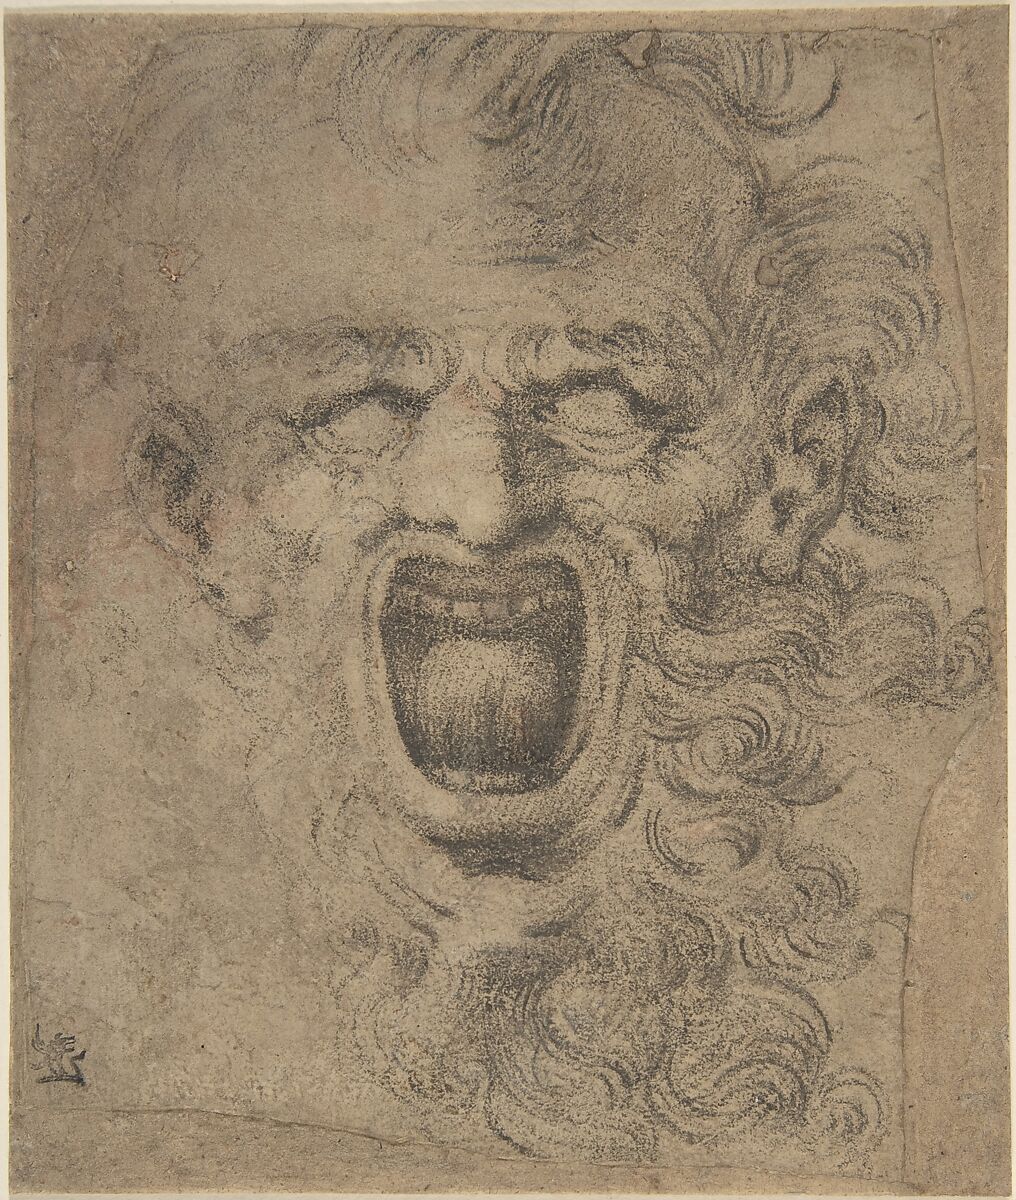 Grotesque Head with Curly Beard, Anonymous, Italian, 16th to 17th century, Black chalk, over graphite or black chalk 